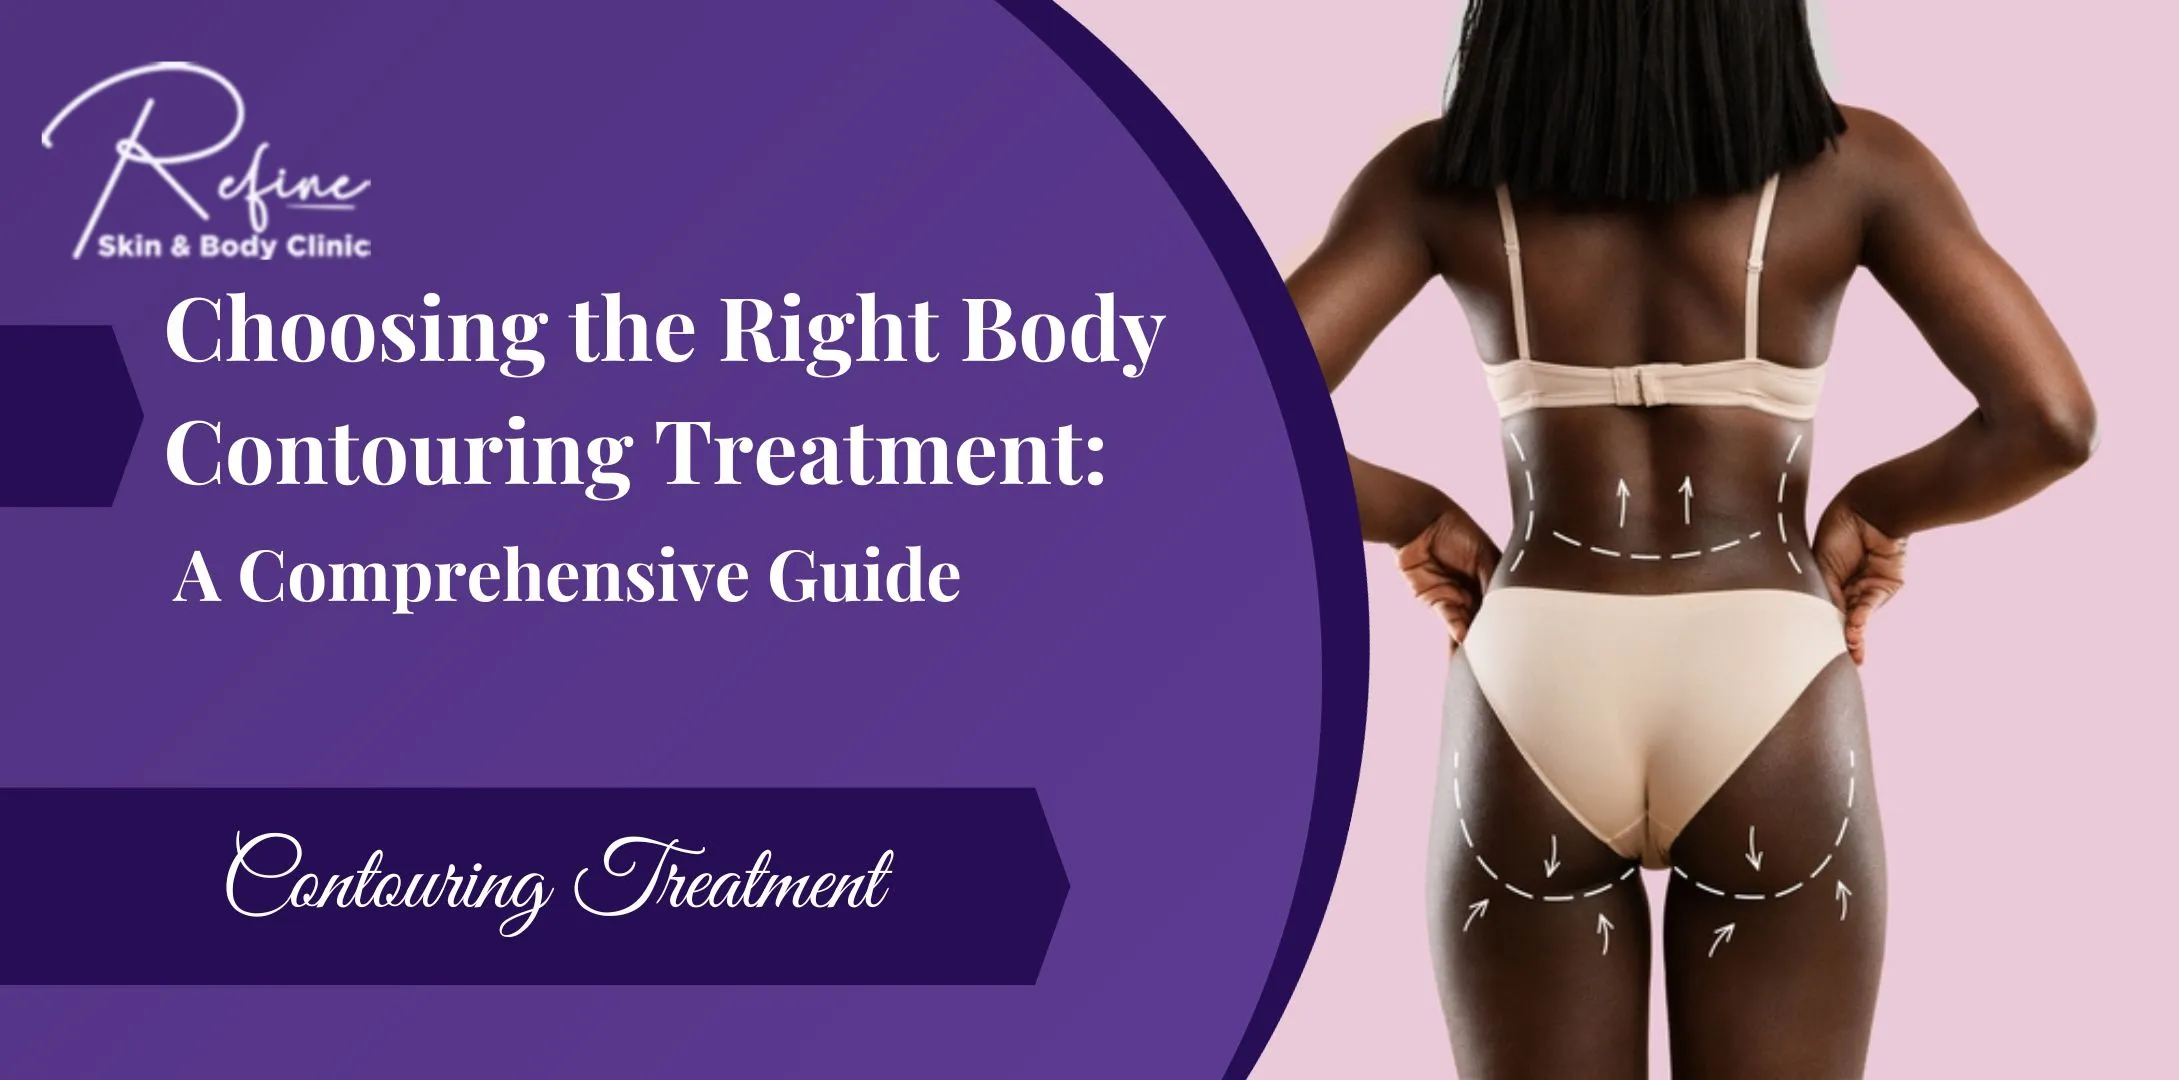 Choosing the Right Body Contouring Treatment: A Comprehensive Guide